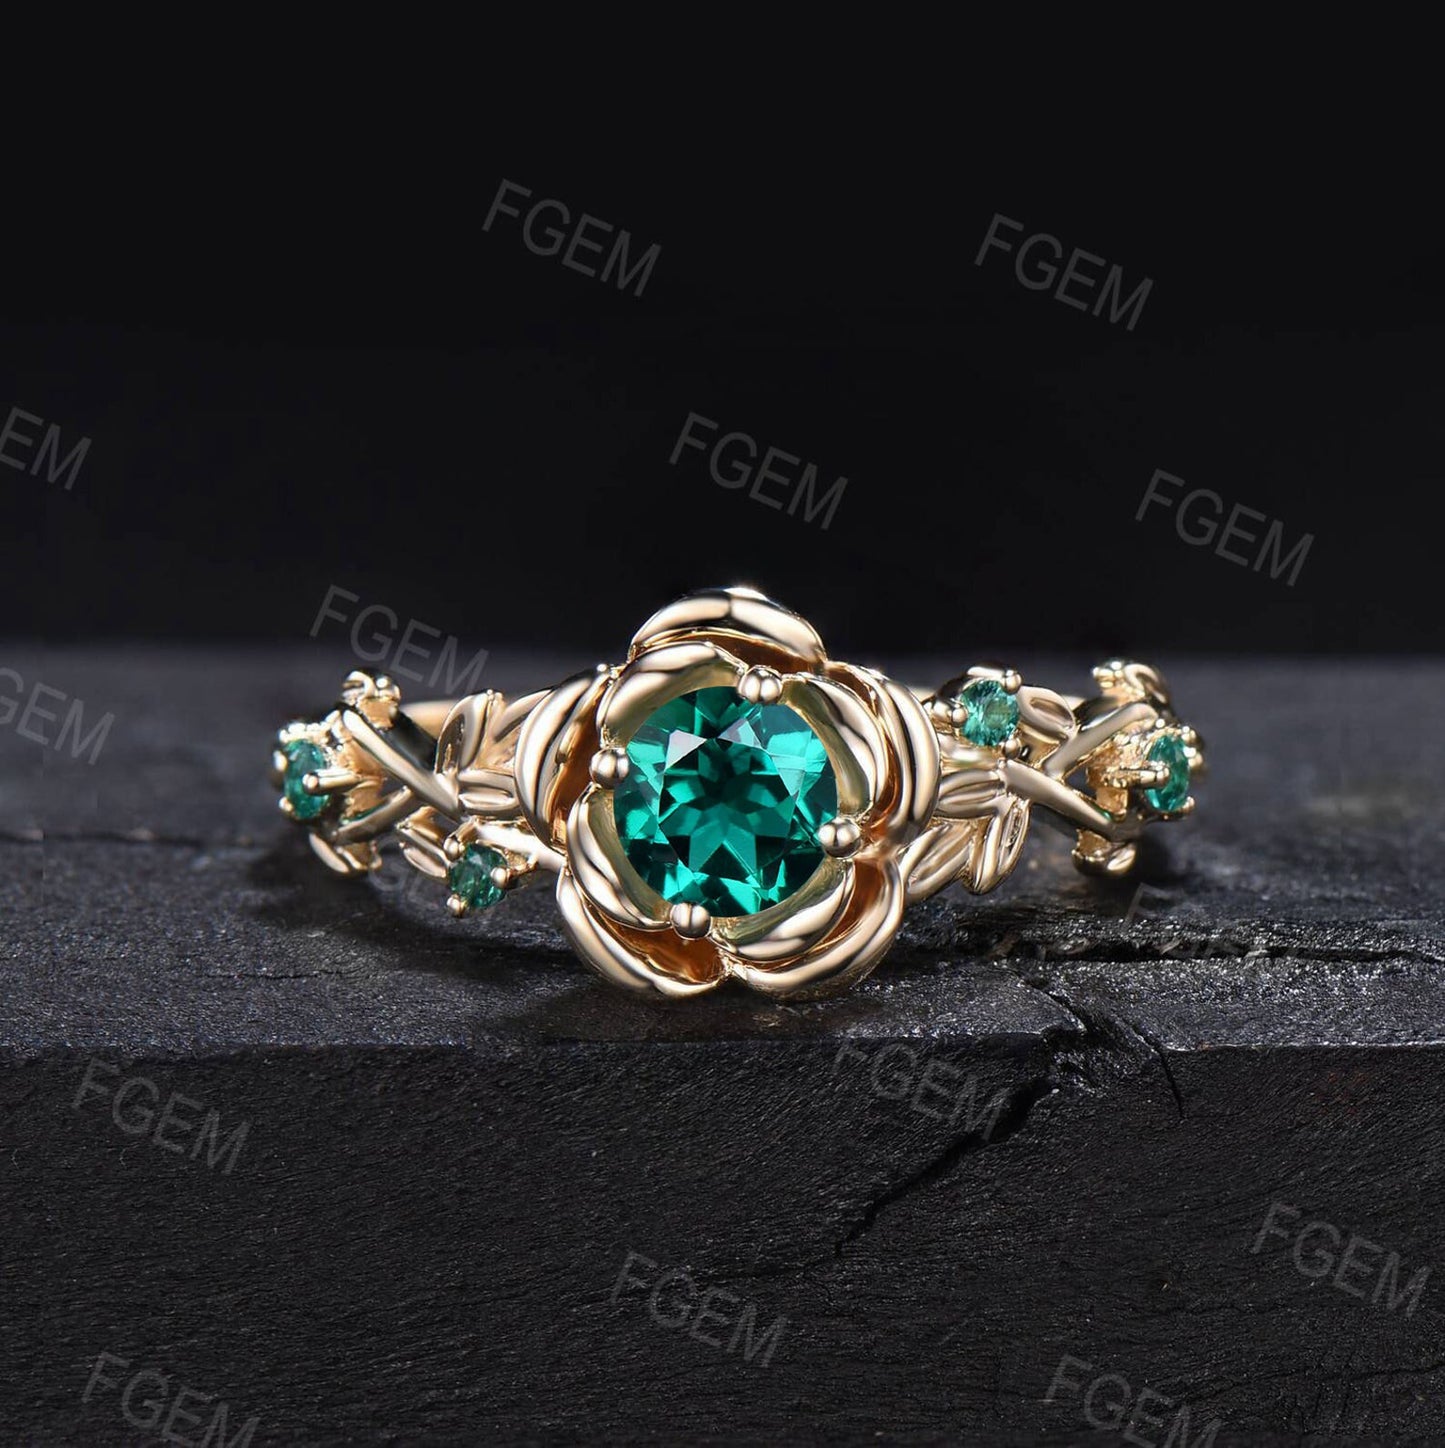 Rose Flower Shaped Ring 5mm Round Green Emerald Wedding Ring Set 10K Rose Gold Nature Inspired Floral Moss Agate Emerald Ring Promise Gift